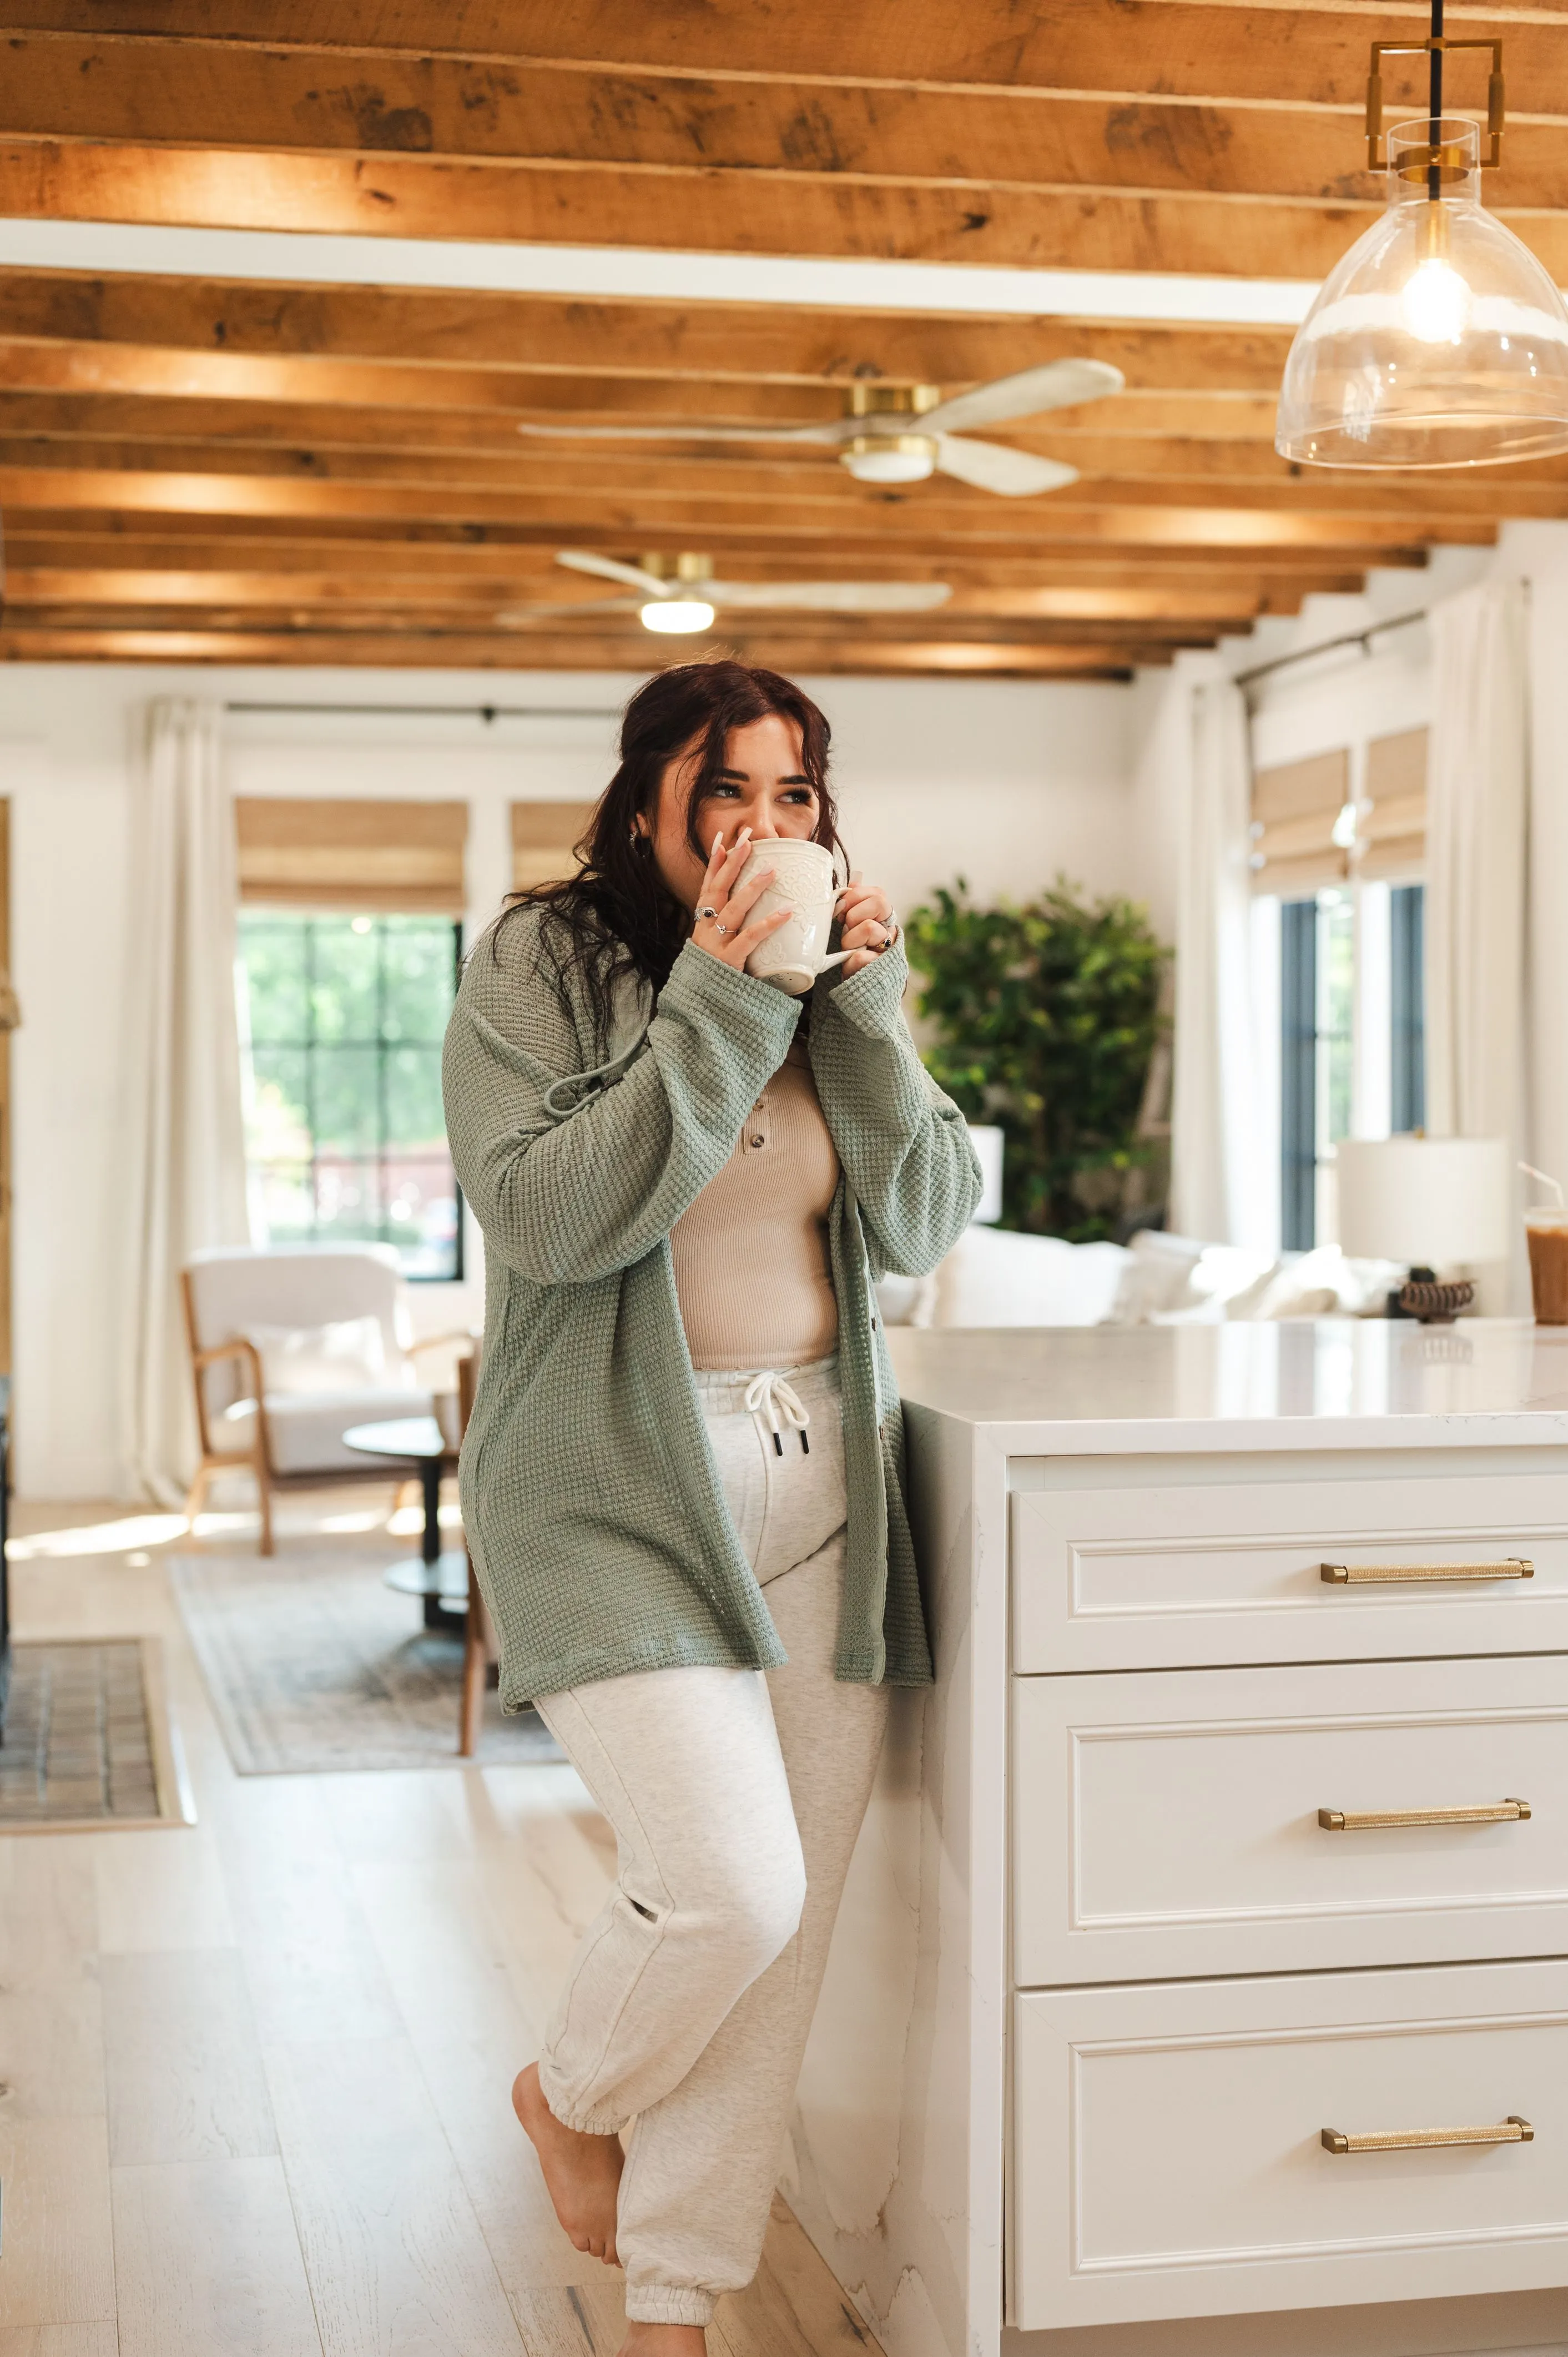 Woman in cozy attire leaning on kitchen counter sipping from a mug.